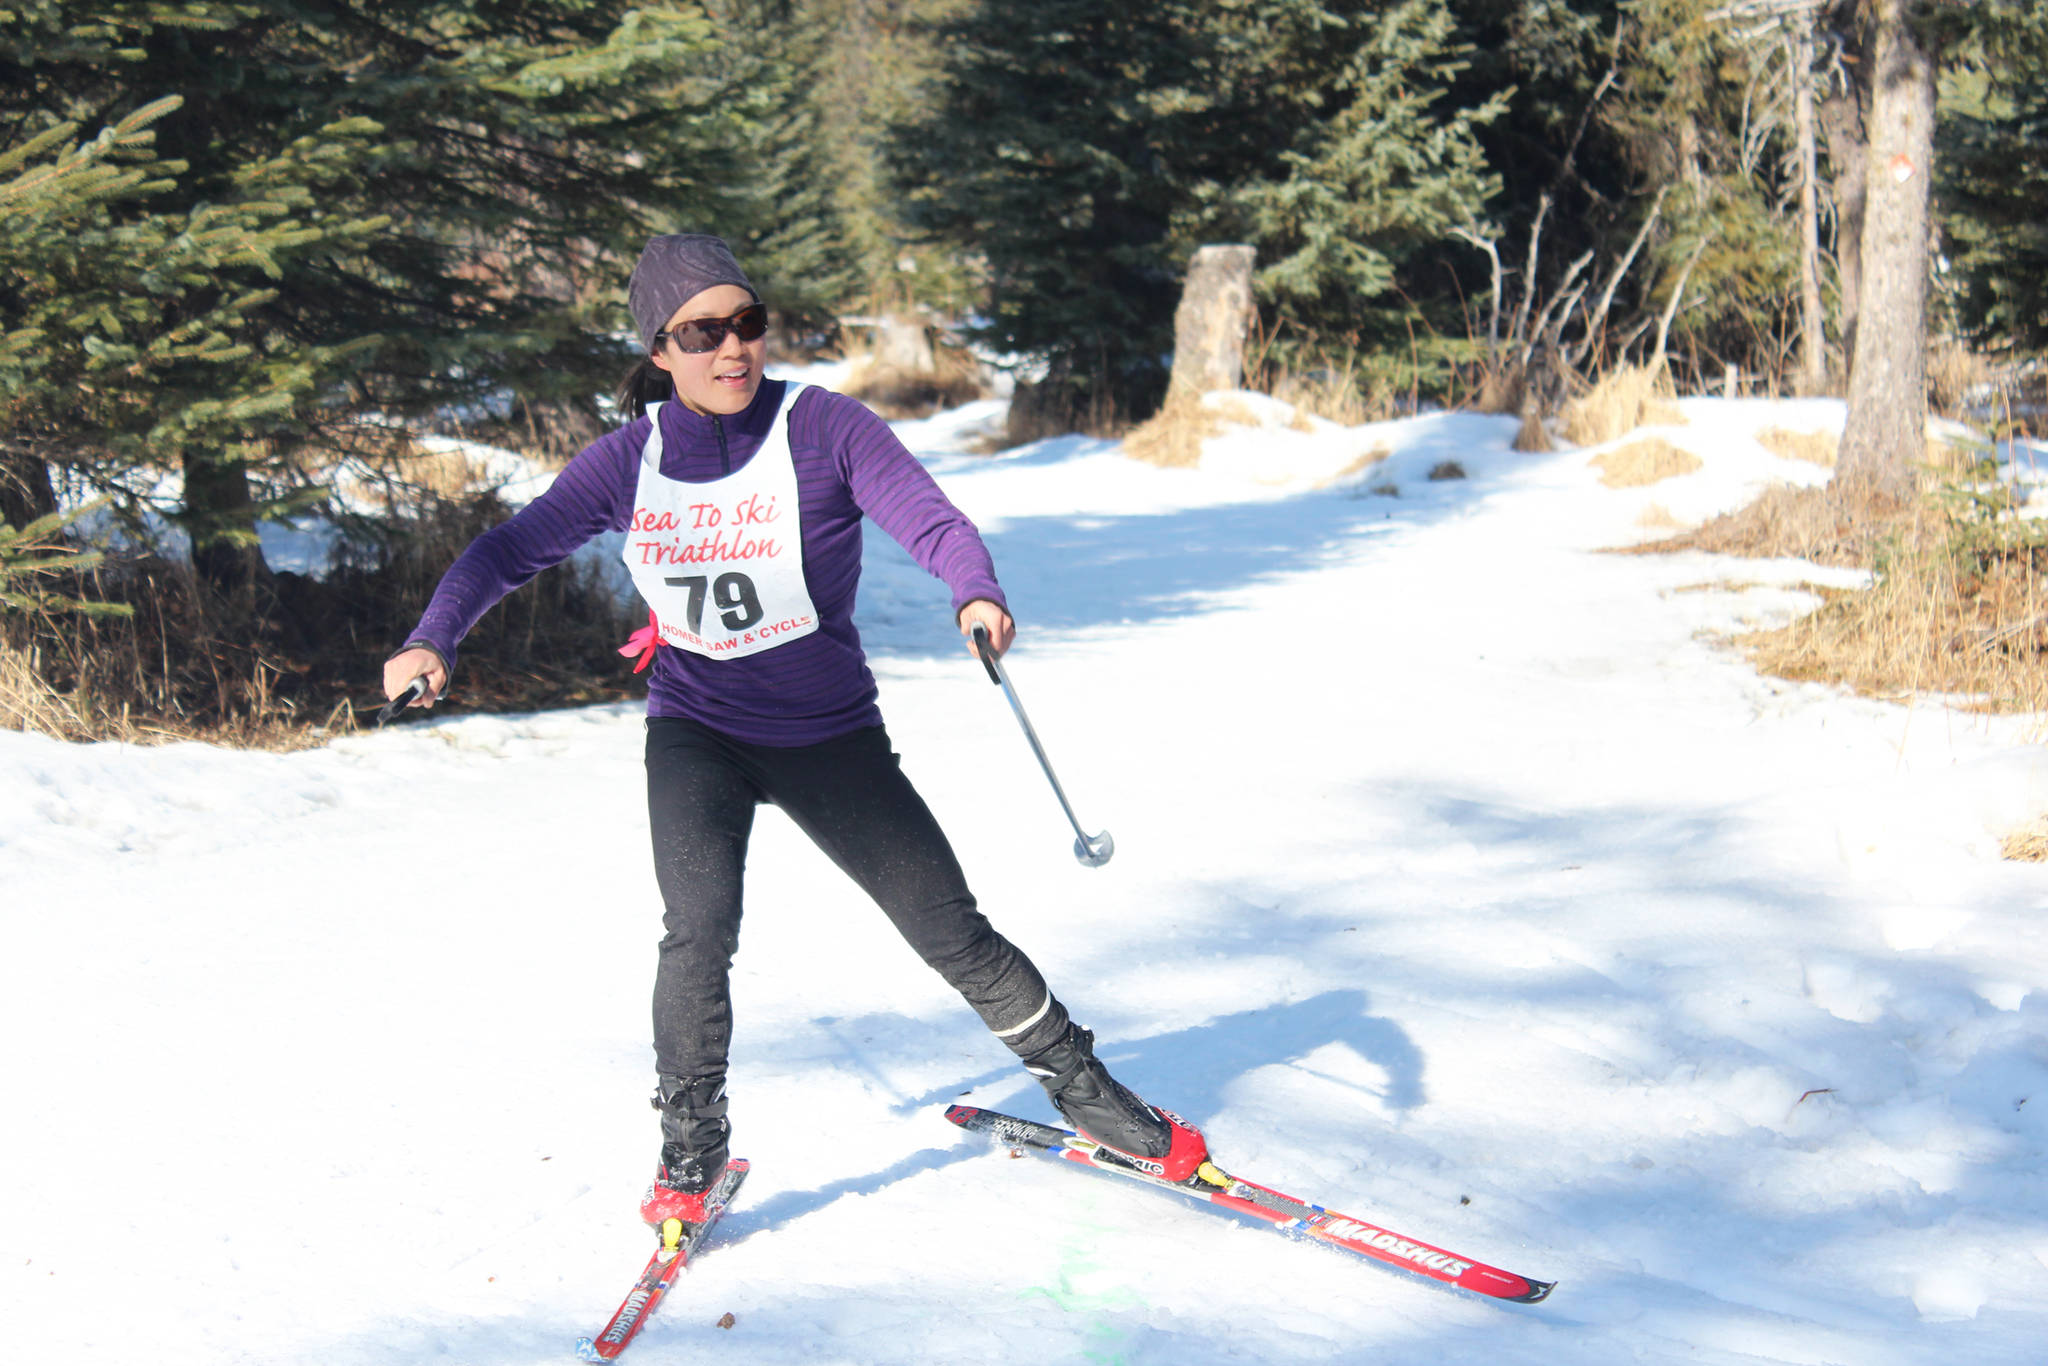 Jennifer Bando skis to the finish line of this year’s Sea to Ski Triathlon at the Roger’s Loop Trailhead on Sunday, March 25, 2018 in Homer, Alaska. Bando finished first for the female individual participants with a time of 1 hour, 17 minutes, 48 seconds. (Photo by Megan Pacer/Homer News)